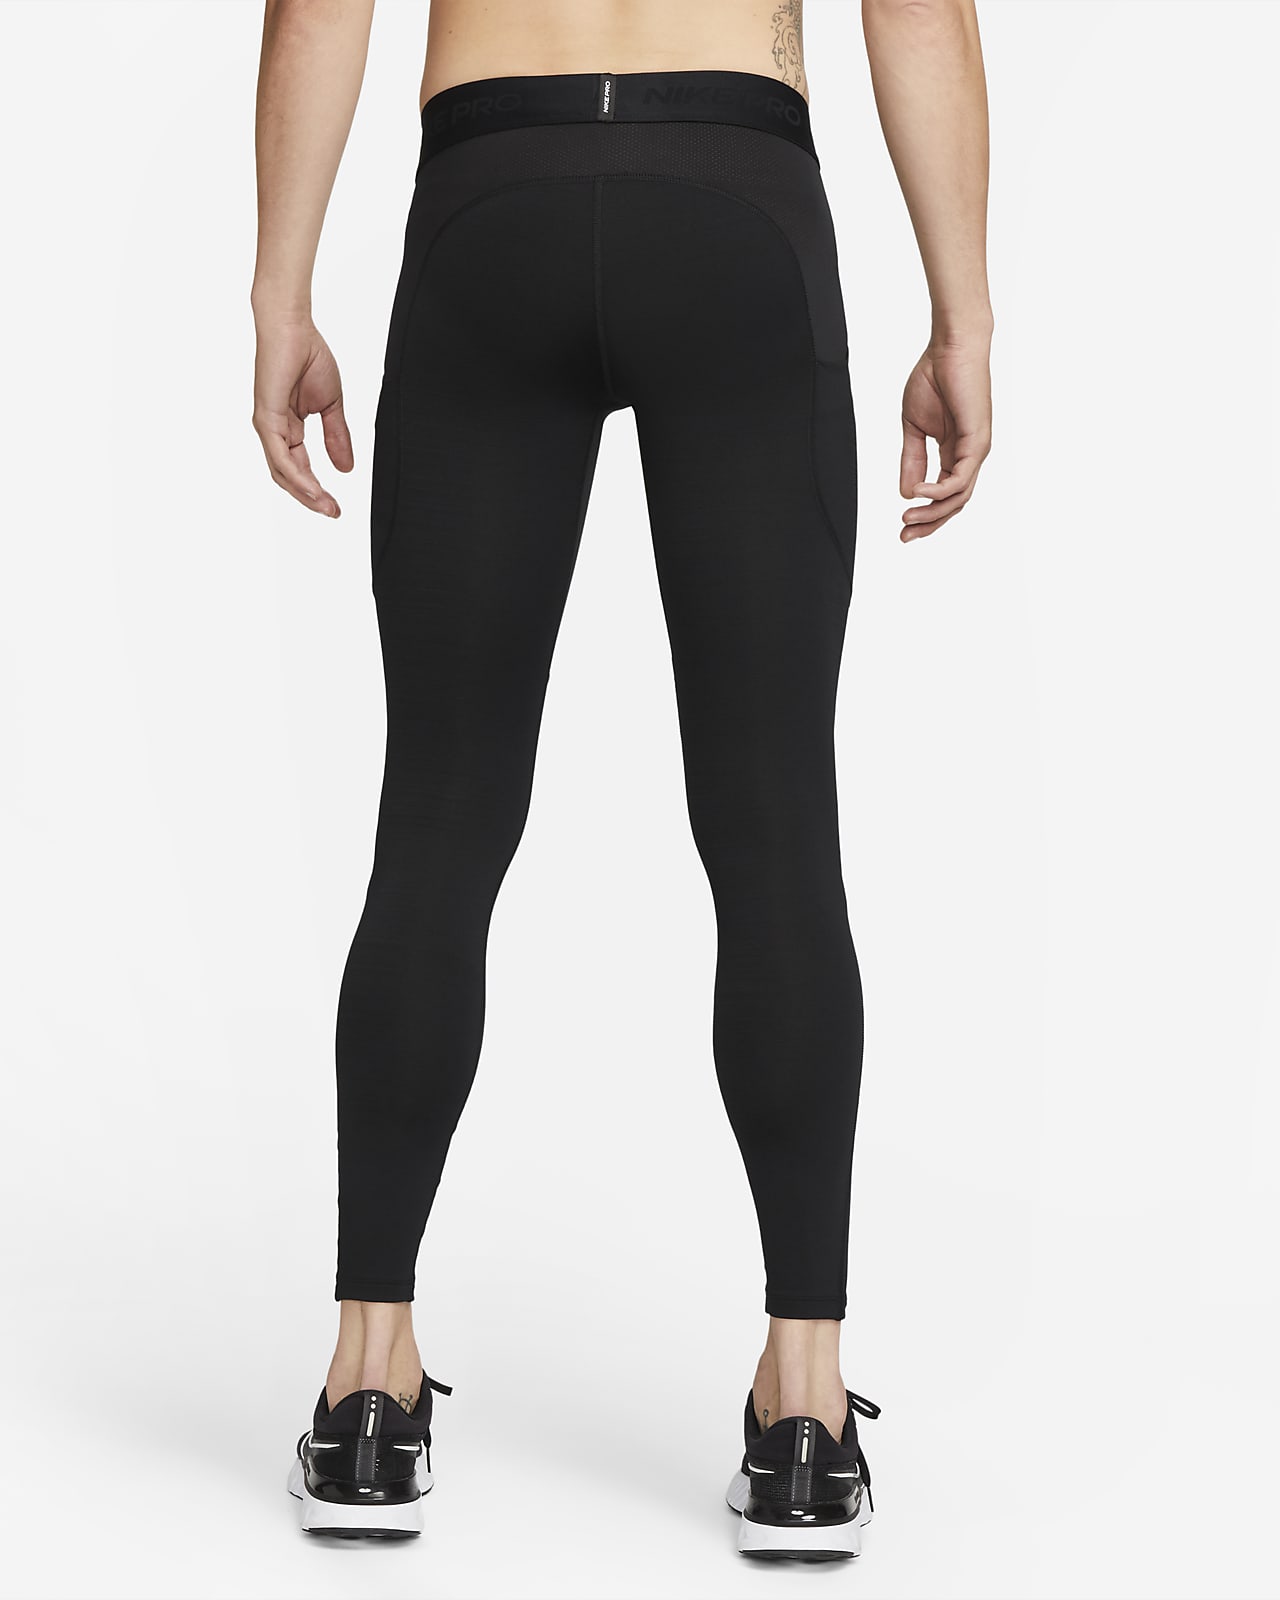 Nike Pro HyperWarm Tights  Leggings are not pants, Clothes design, Tights